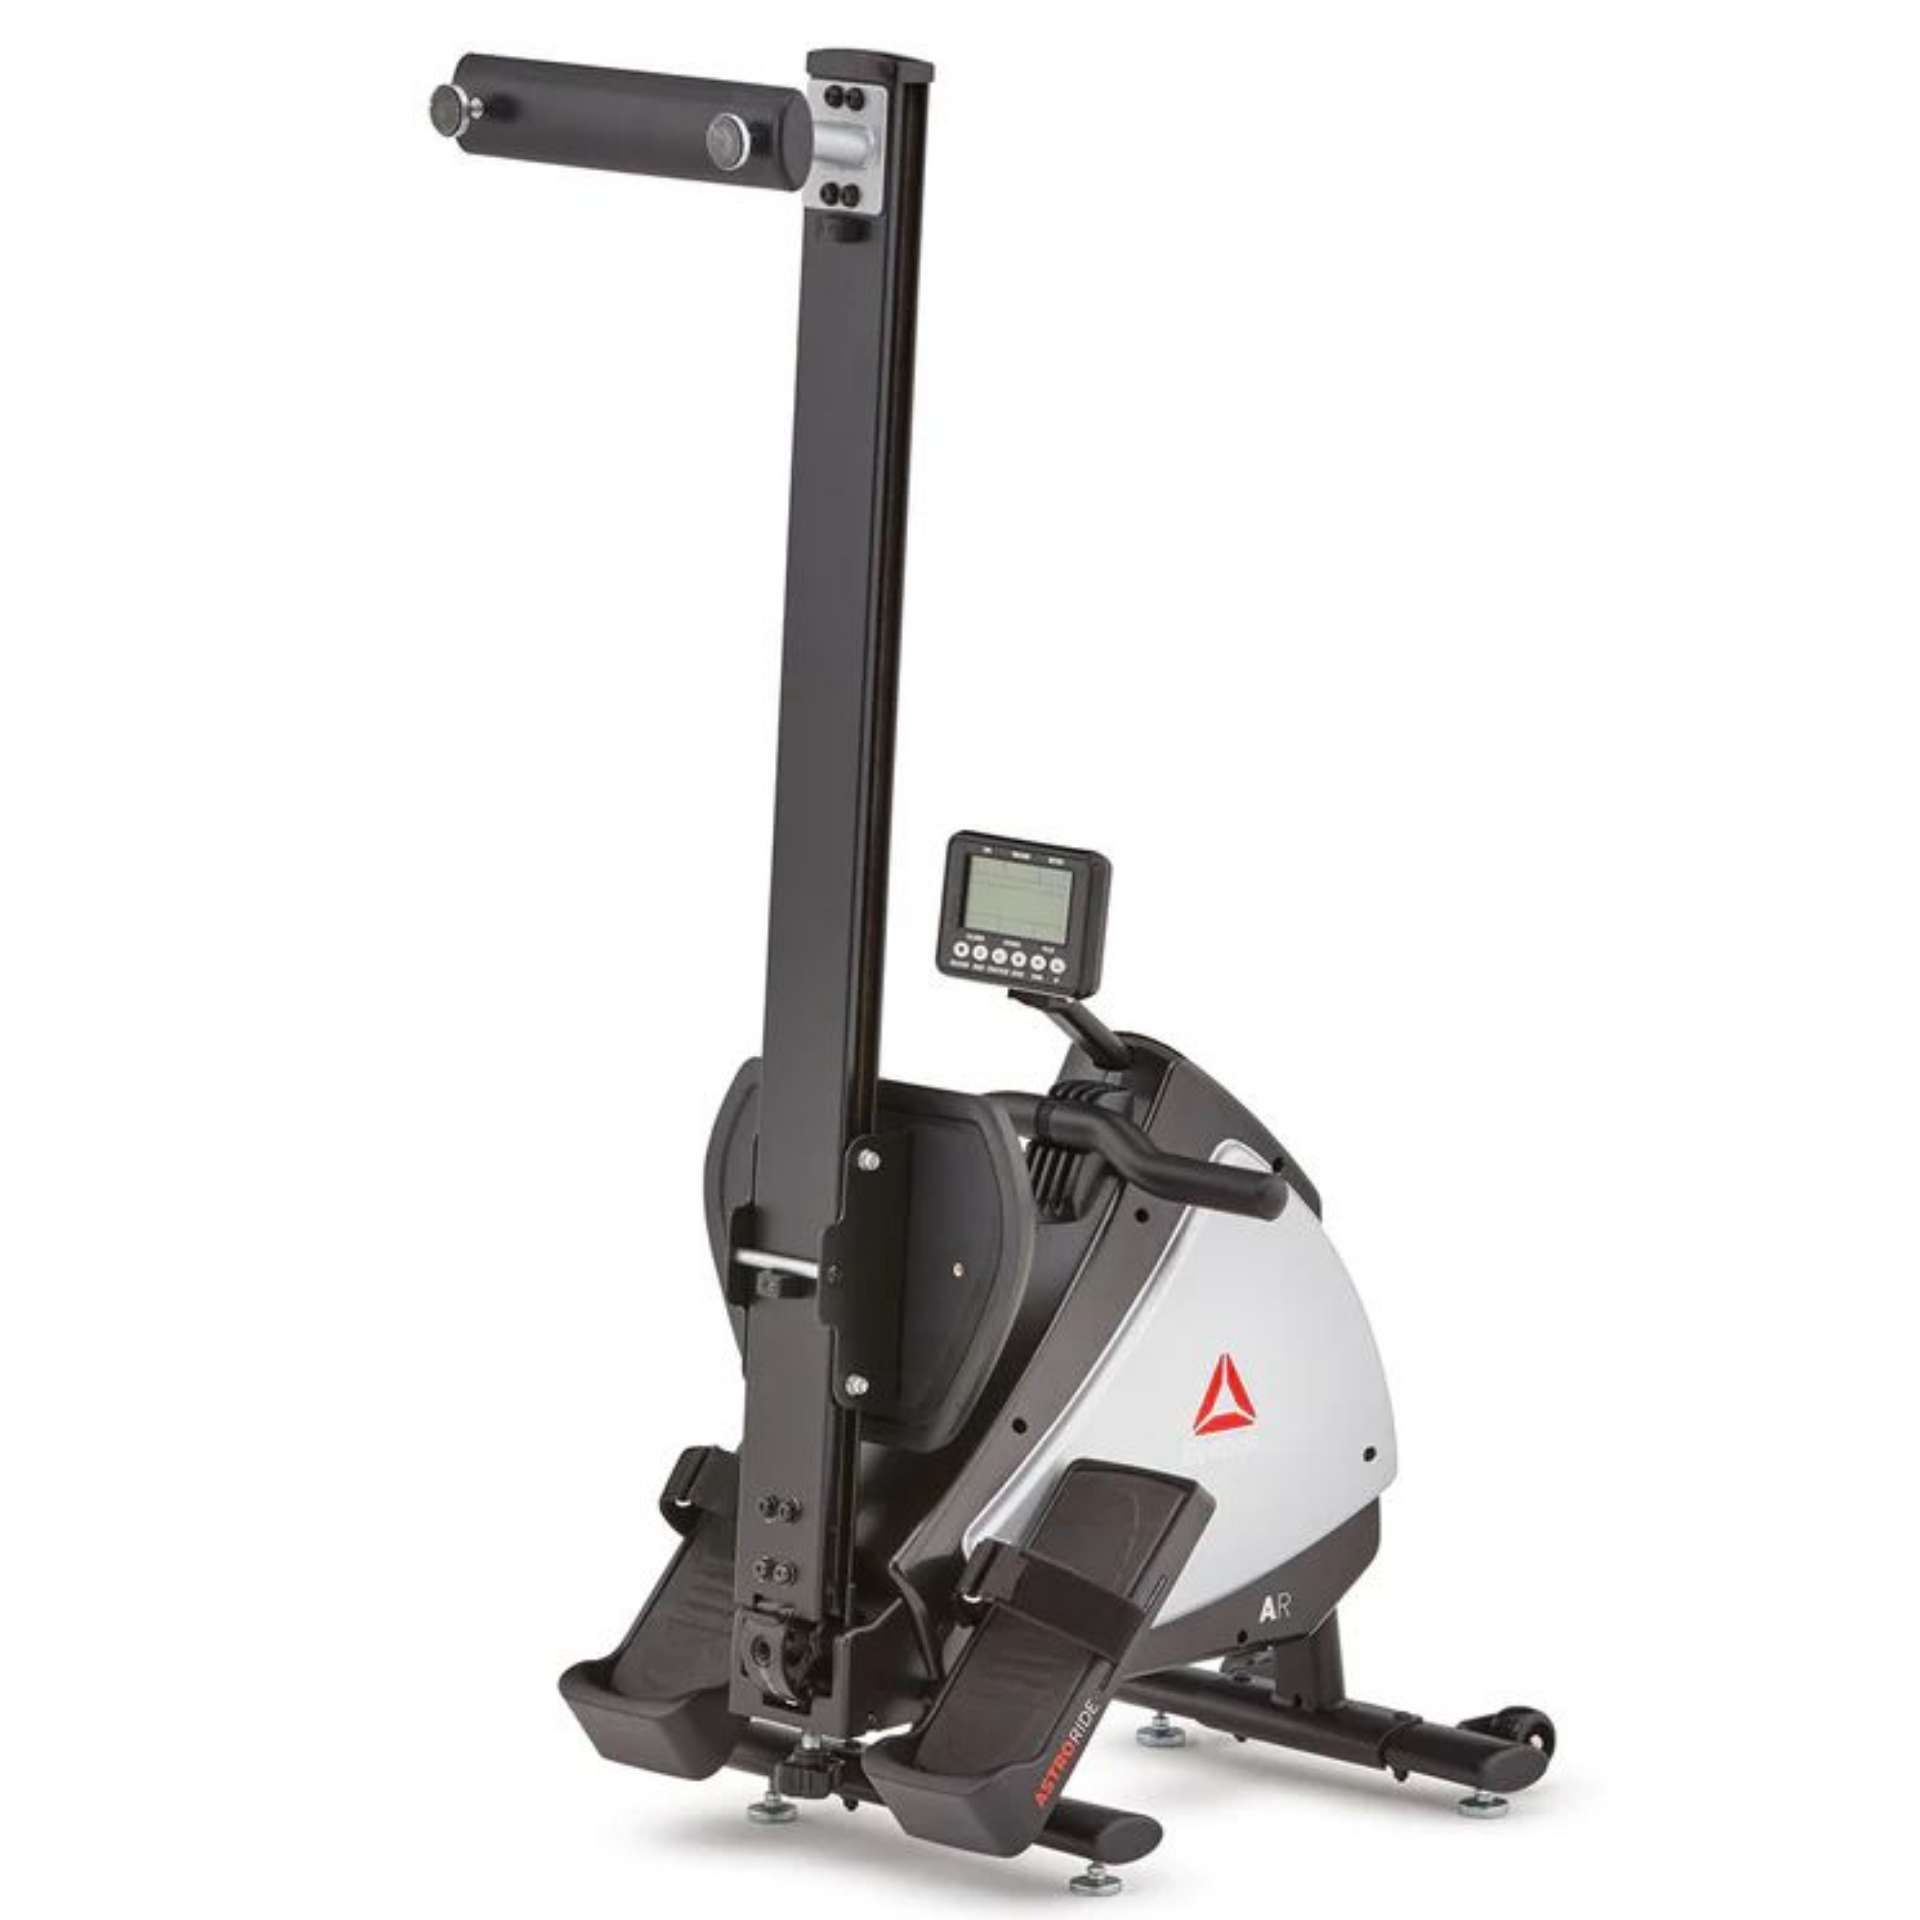 BRAND NEW REEBOK AR Rower. RRP £514.99 EACH R18-4. Designed for you to create more effective and - Image 2 of 4